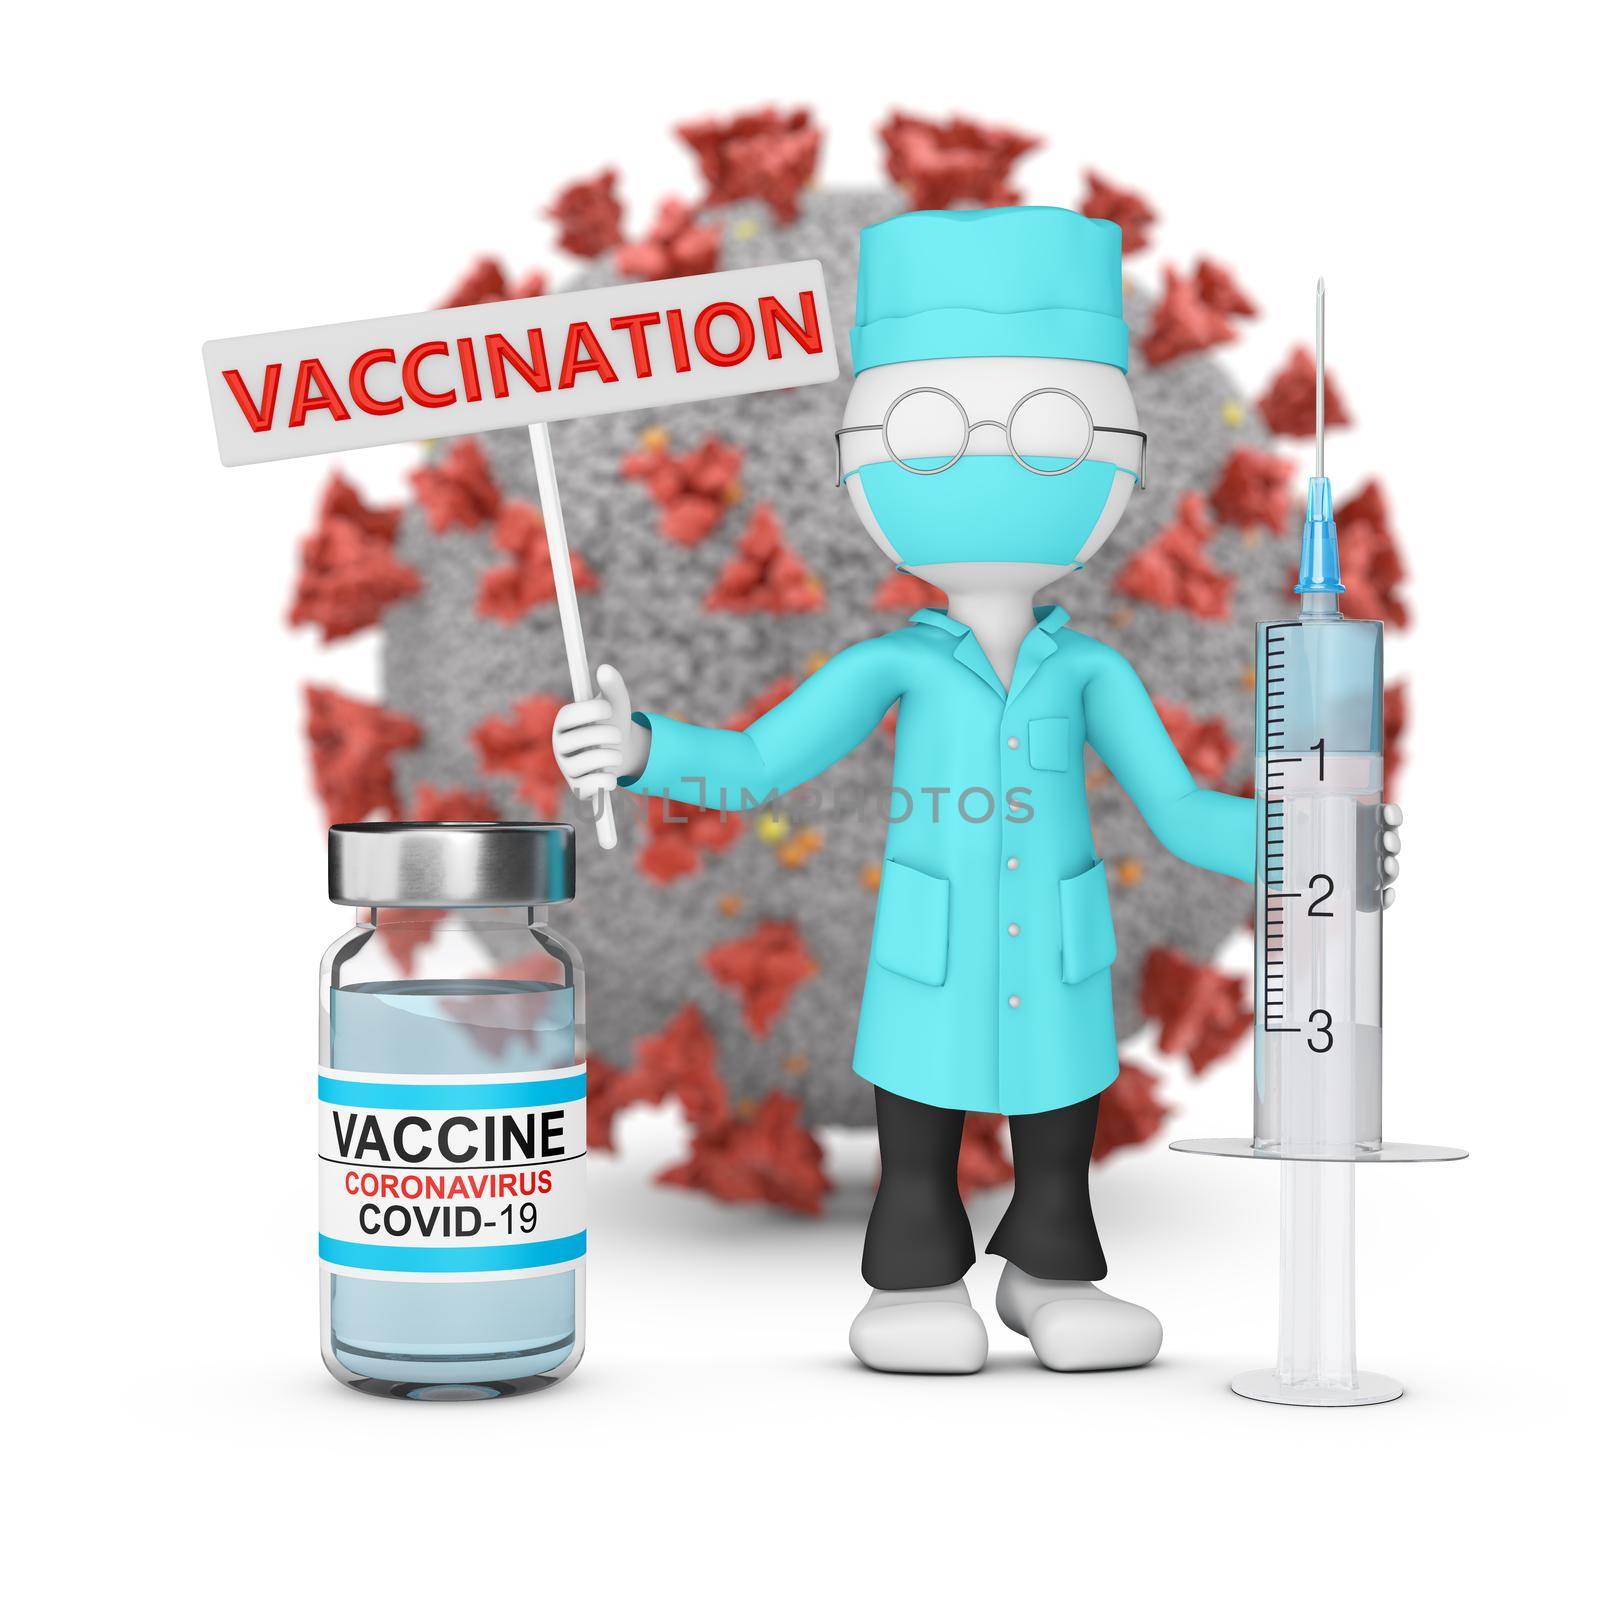 A doctor in a lab coat with a syringe stands next to a bottle of vaccine against the backdrop of a coronavirus. 3d render.